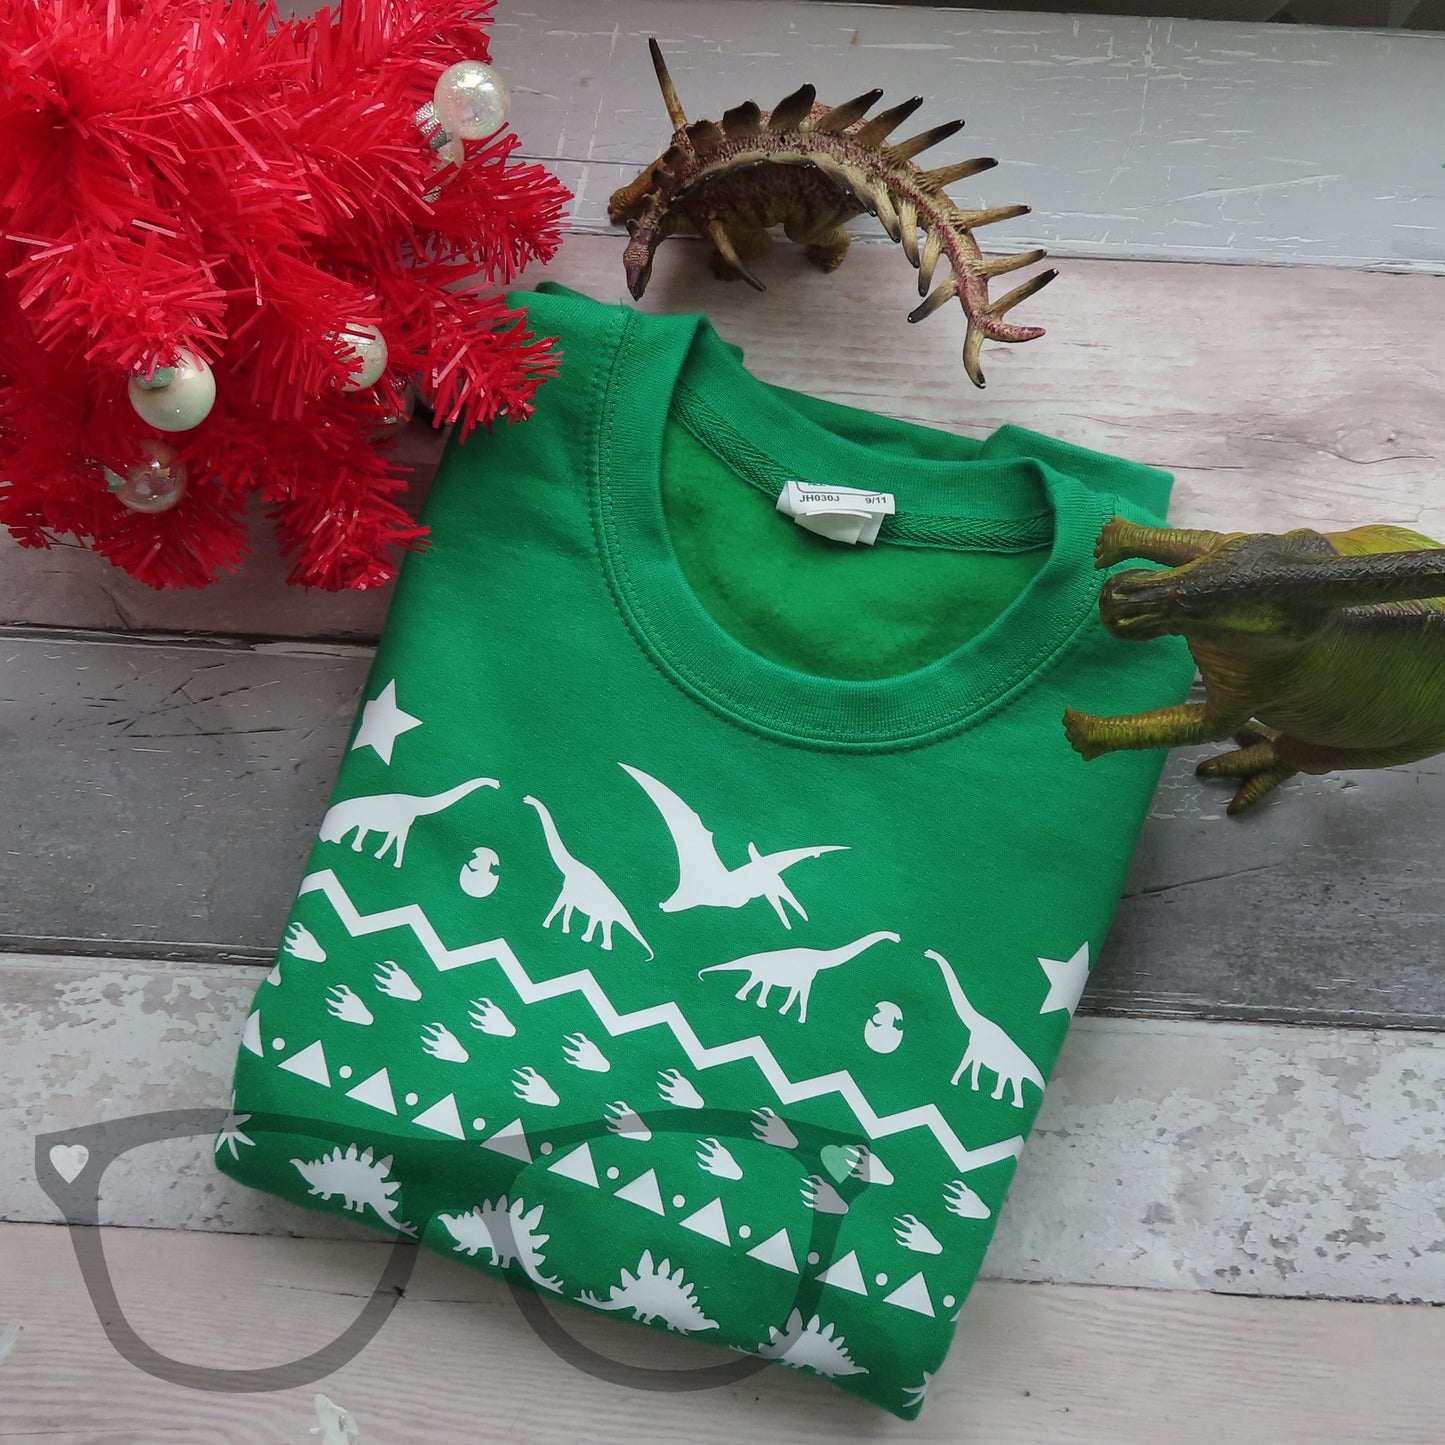 A green Christmas sweater with a white vinyl design on it. It is folded and shown with a Christmas tree and some dinosaurs